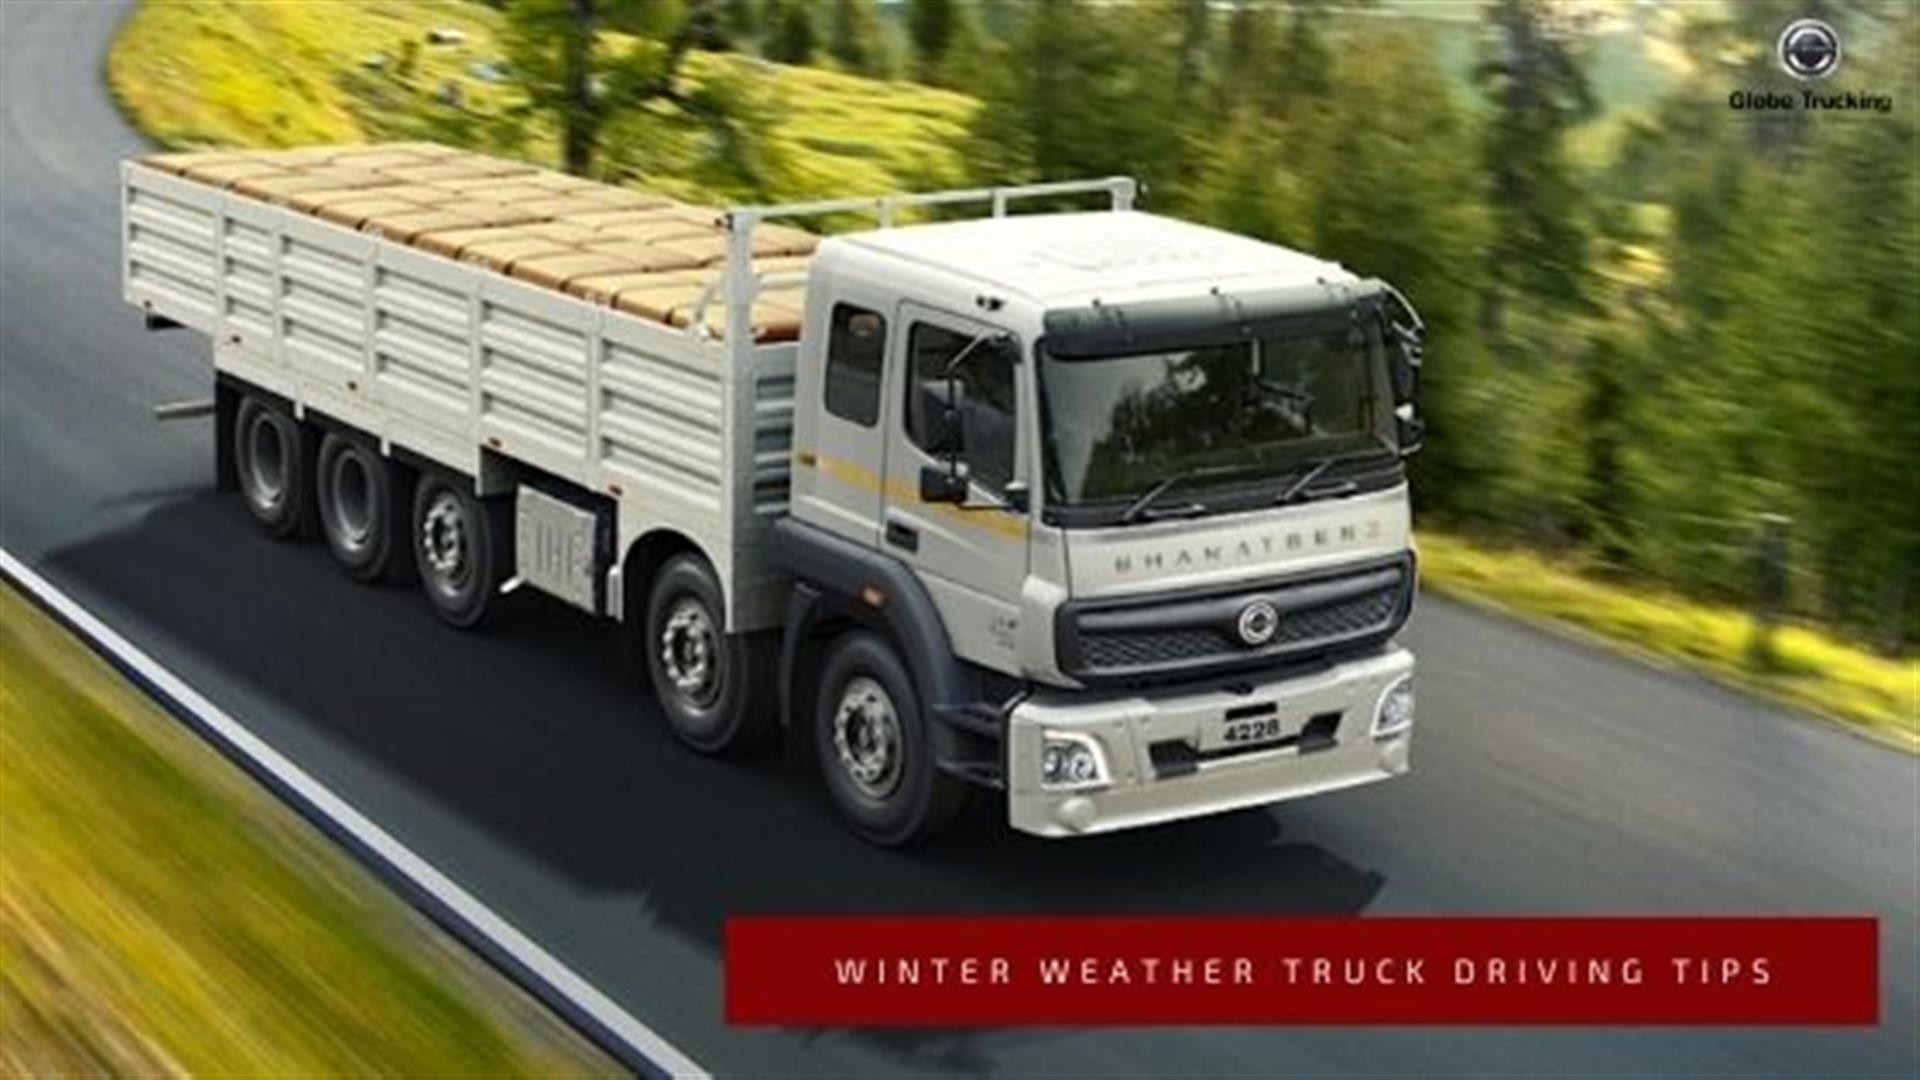 8 Key Winter Weather Truck Driving Tips